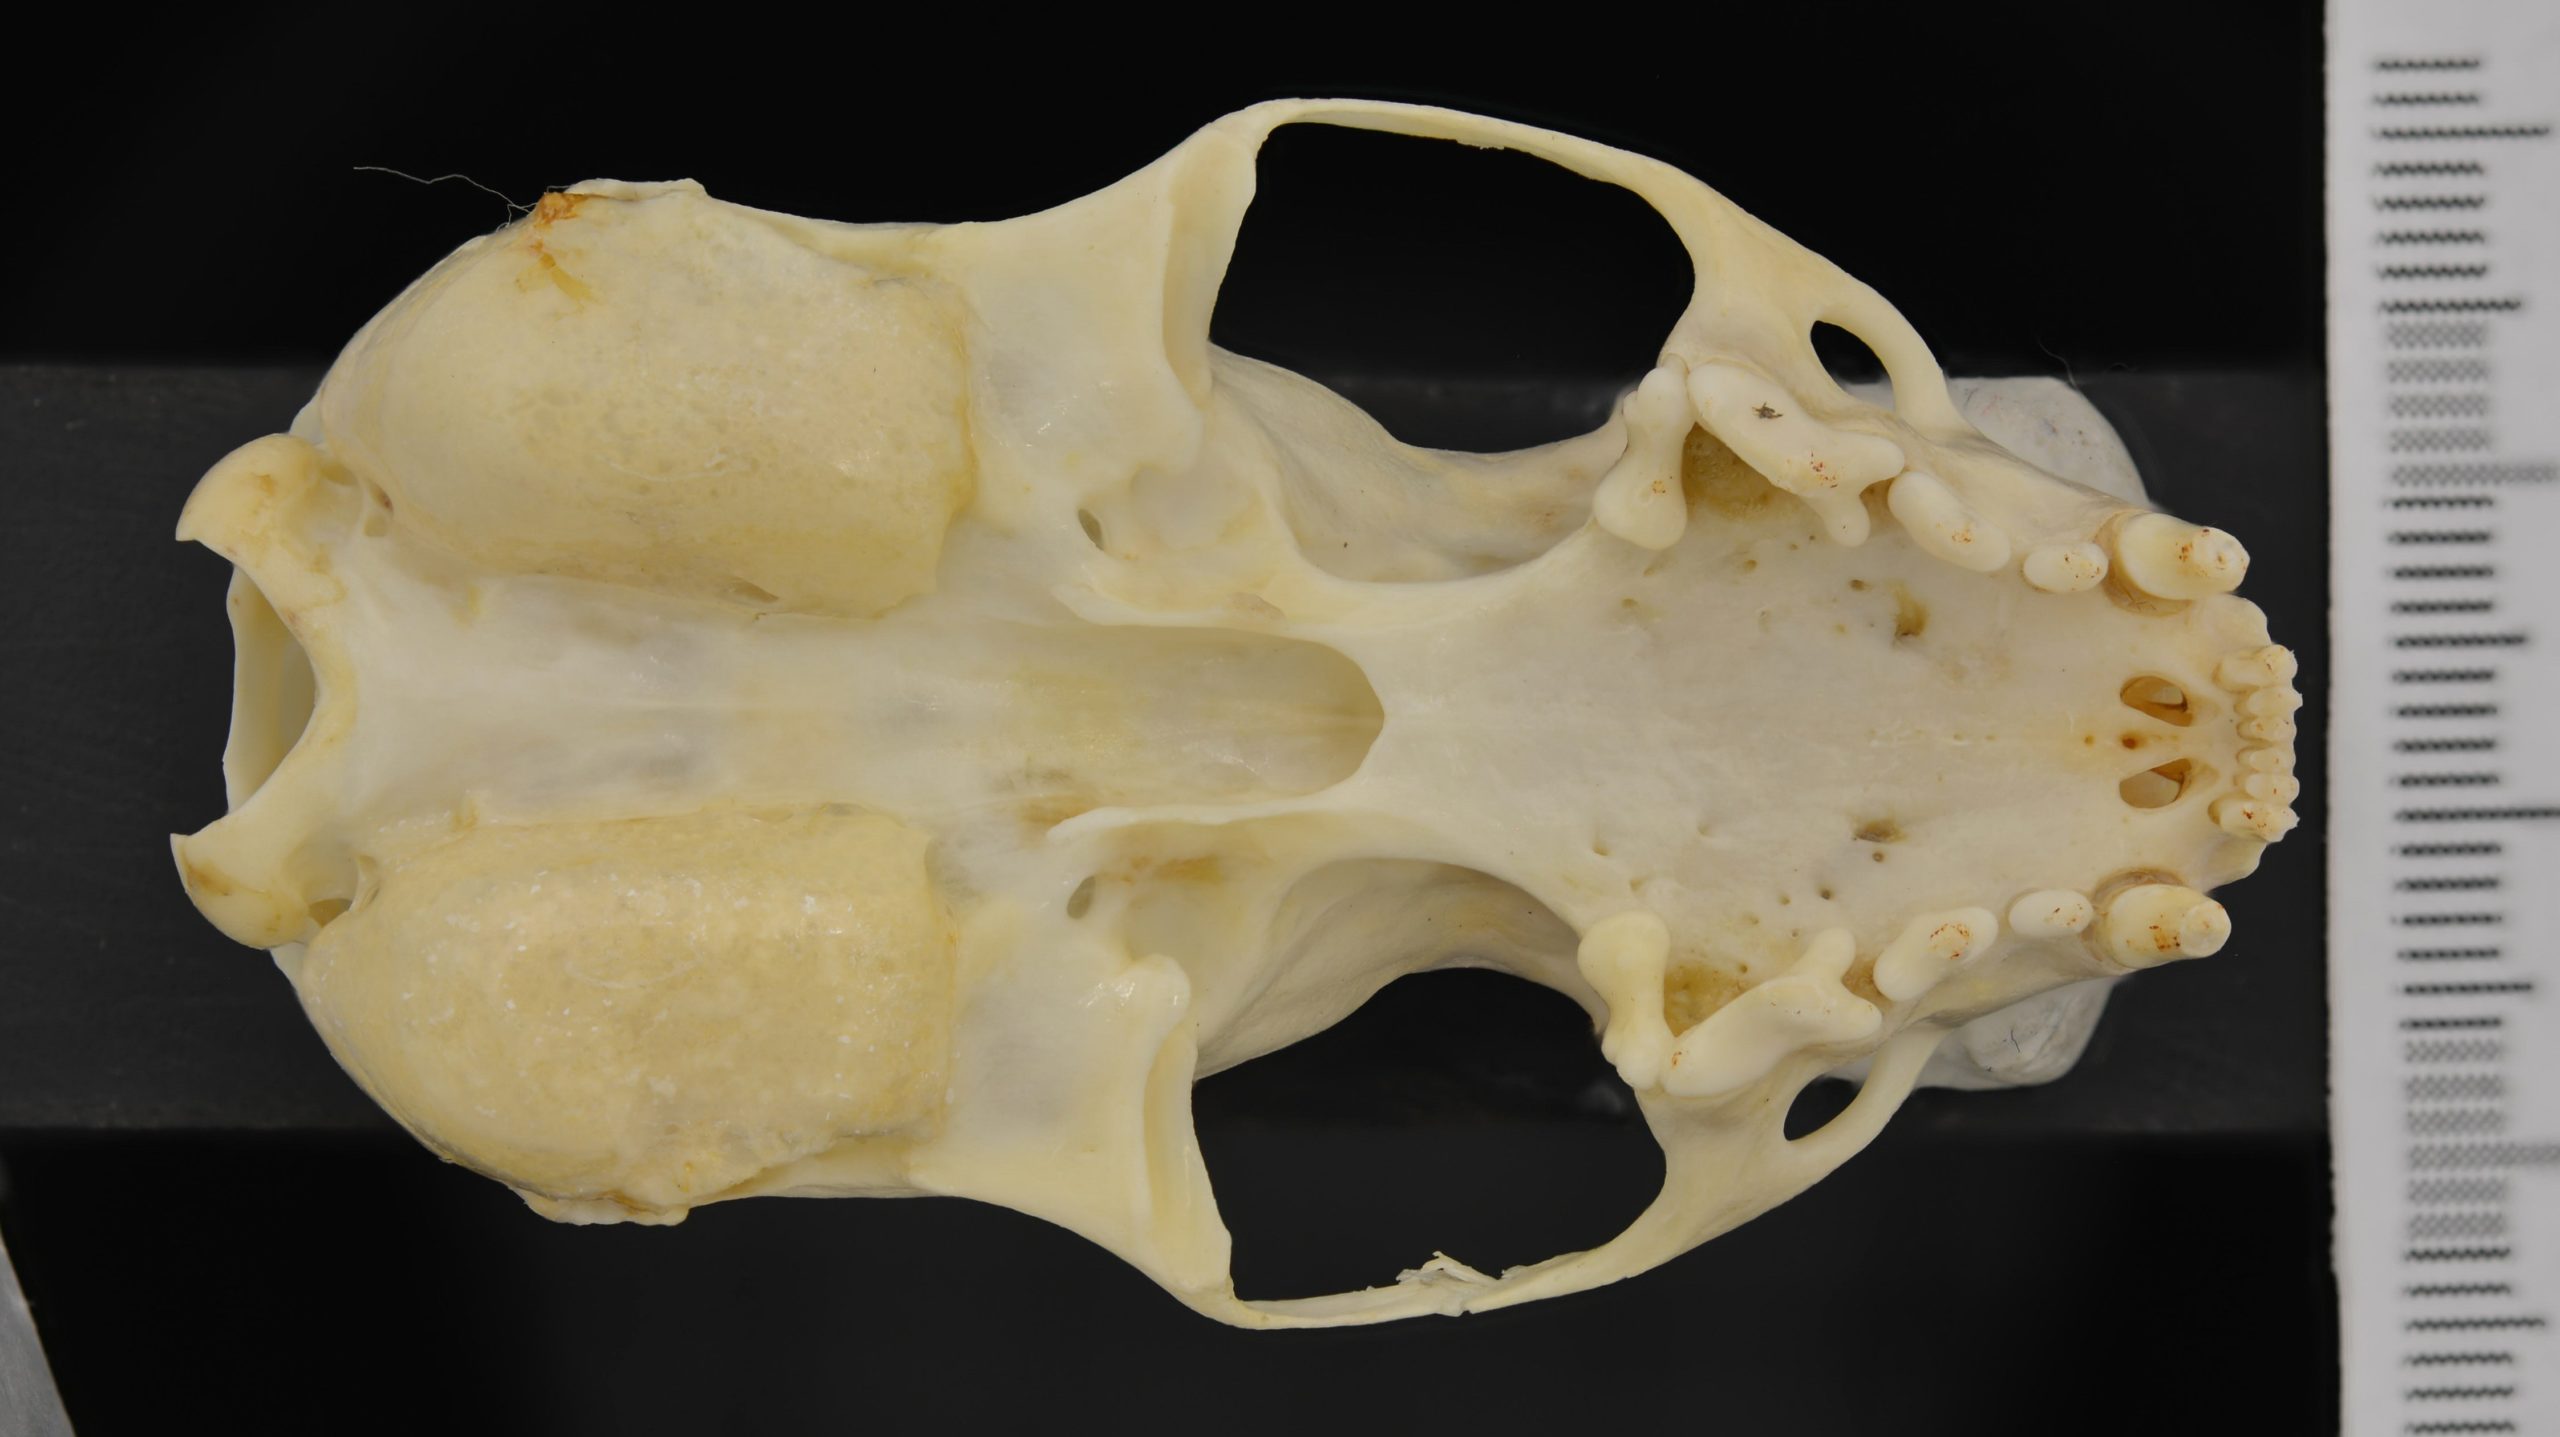 An ermine skull analysed in the study.  (Image: Jocelyn Colella)